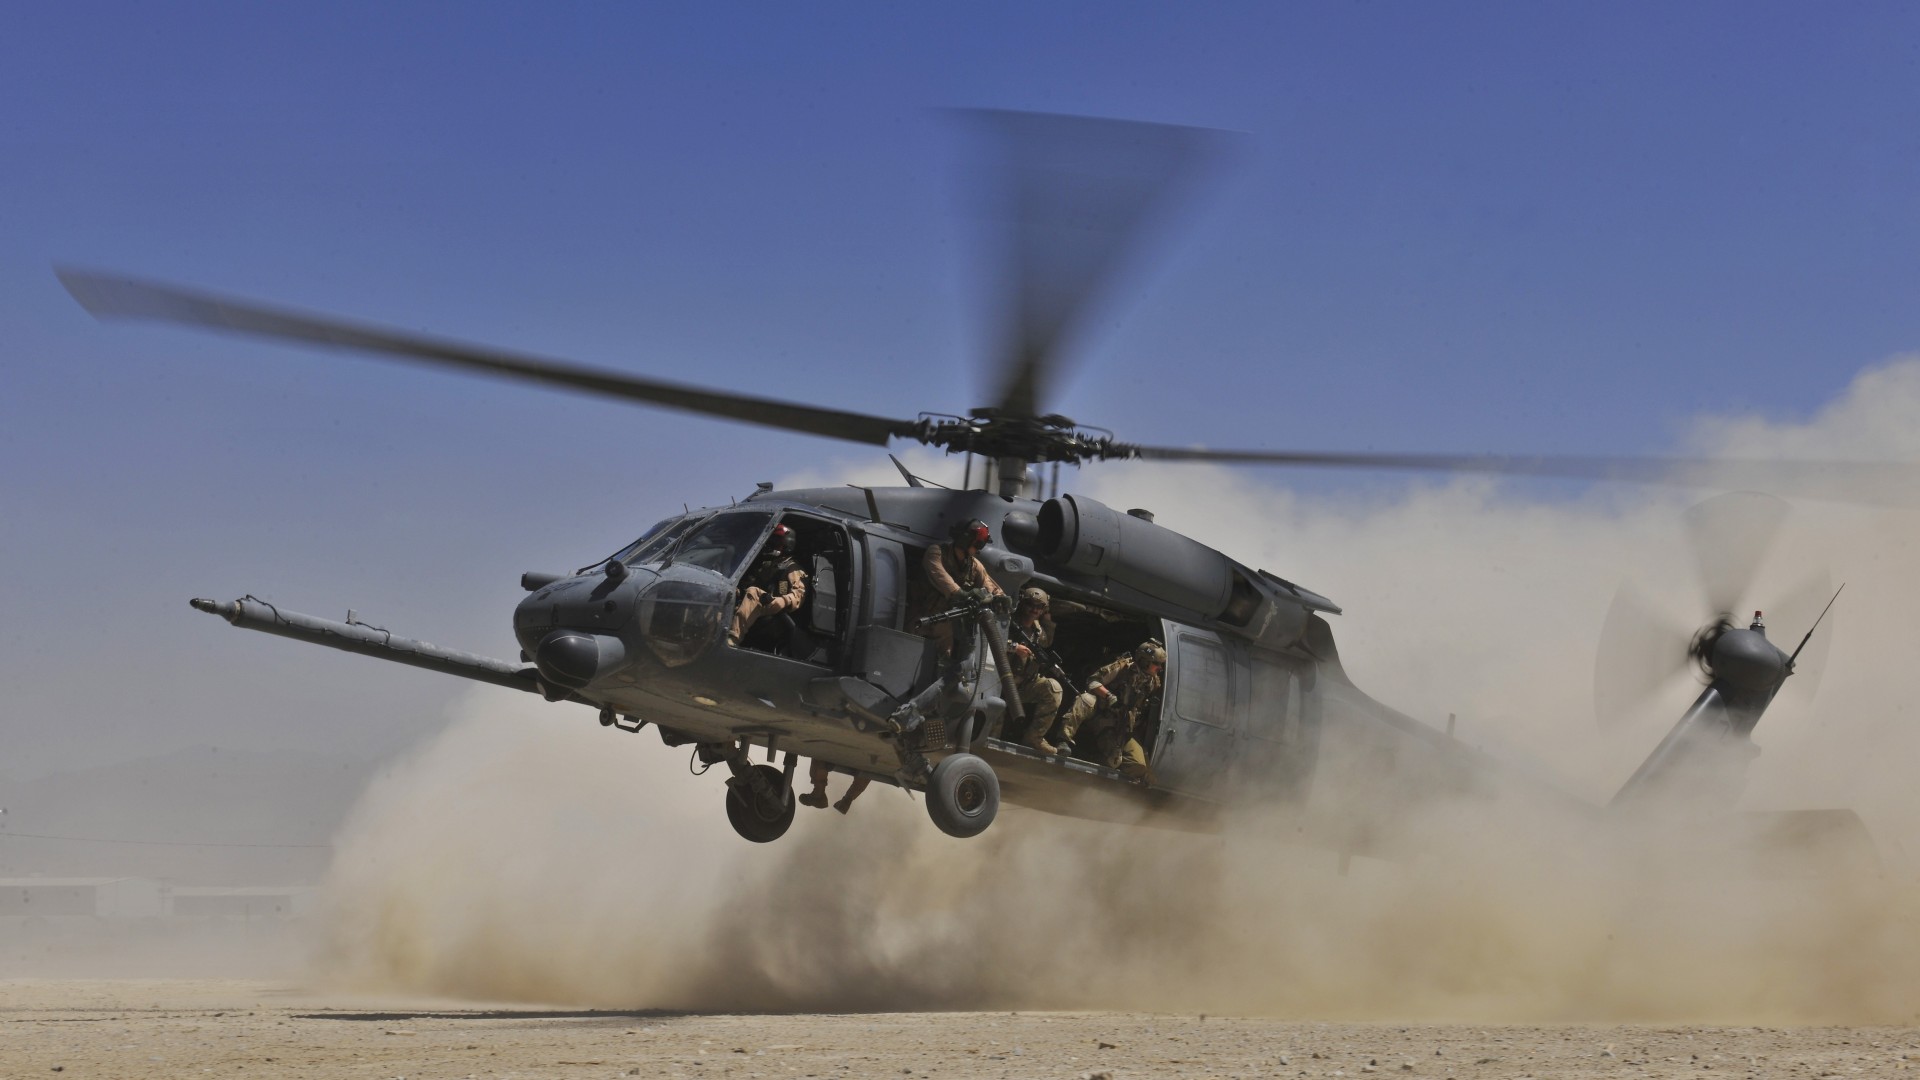 MH-60G, Sikorsky, HH-60G, Pave Hawk, combat search, rescue helicopter, MEDEVAC, USA Army, landing, dust (horizontal)